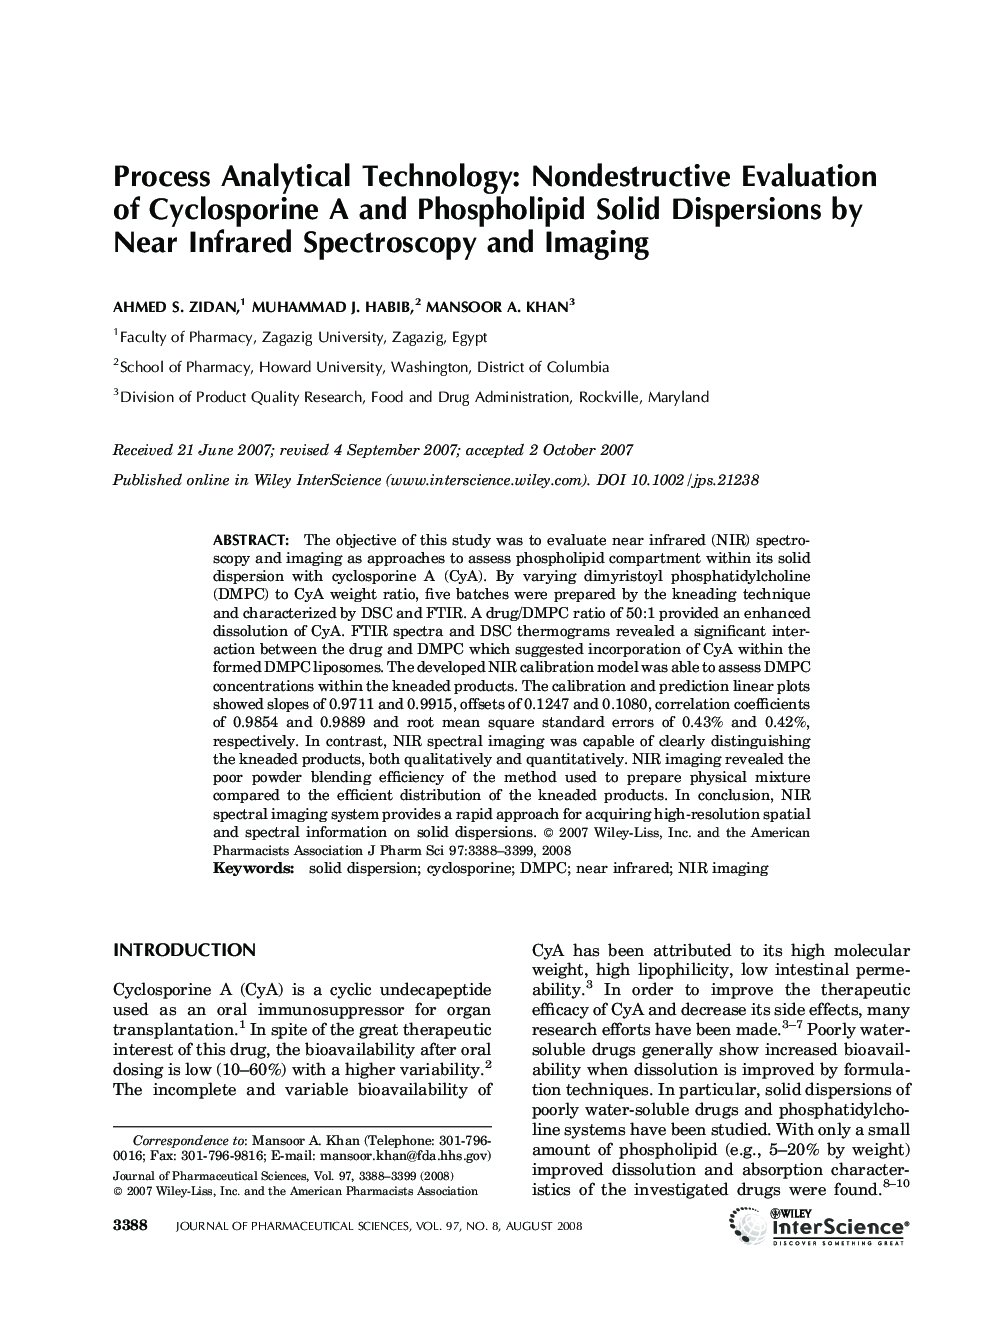 Process Analytical Technology: Nondestructive Evaluation of Cyclosporine A and Phospholipid Solid Dispersions by Near Infrared Spectroscopy and Imaging